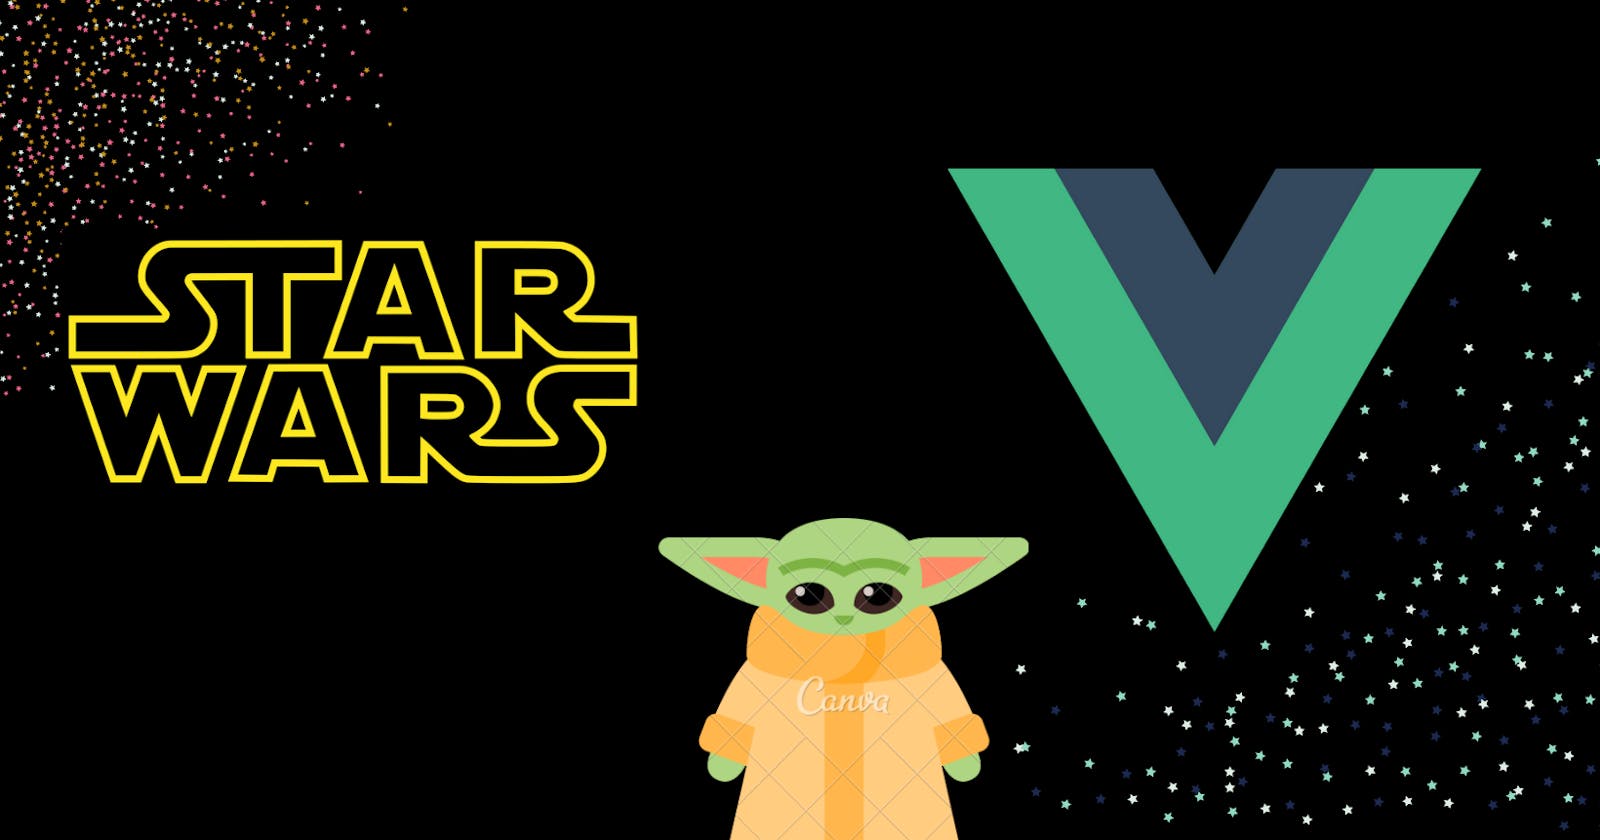 How to make a Star Wars random quote web app